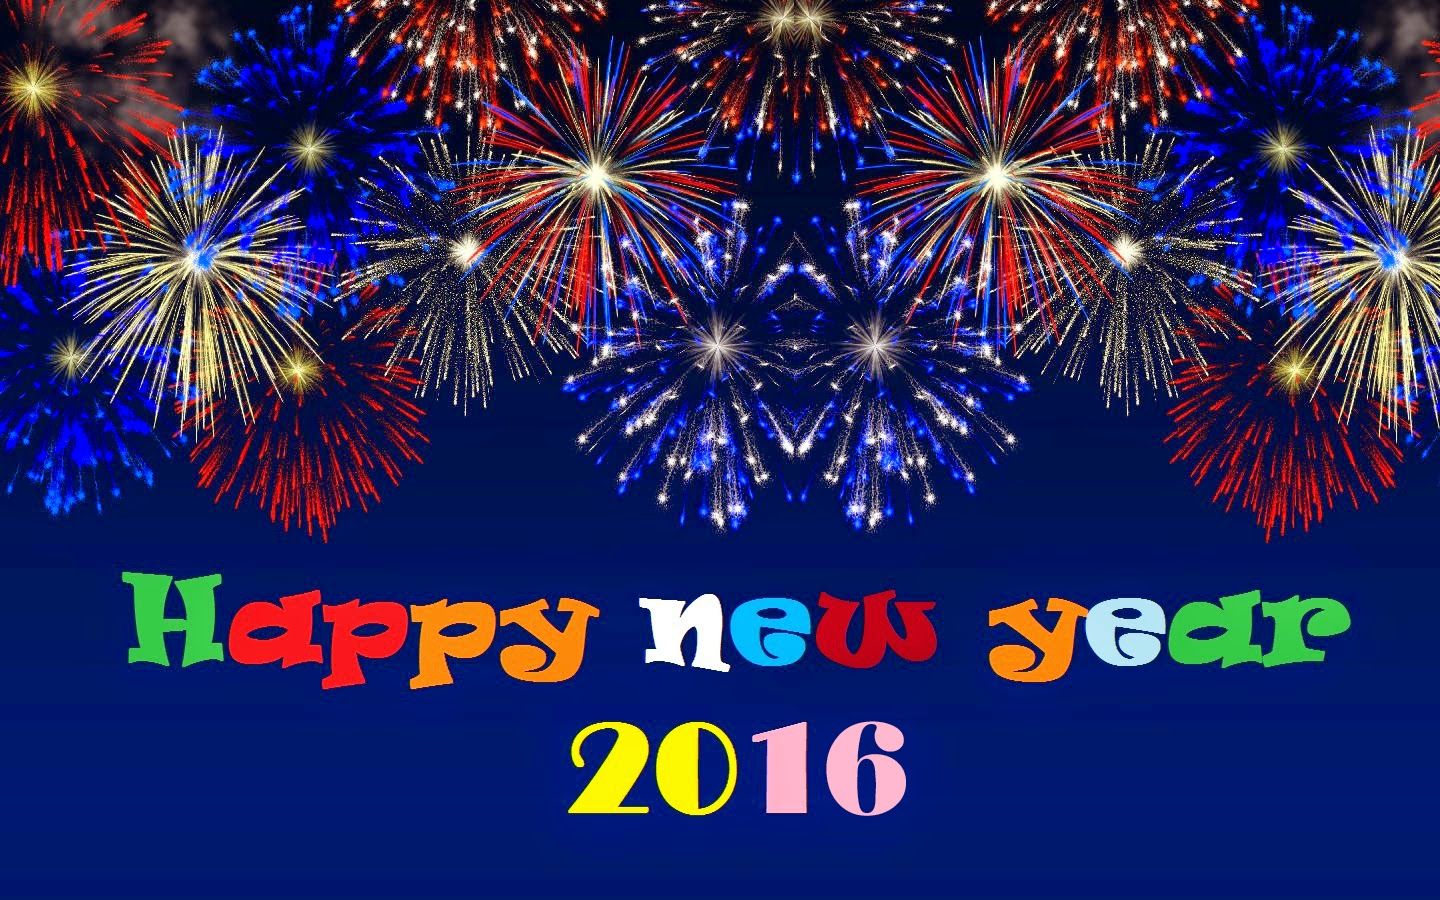 Happy New Year 2016 SMS Messages Wallpapers Happy New Year 2016